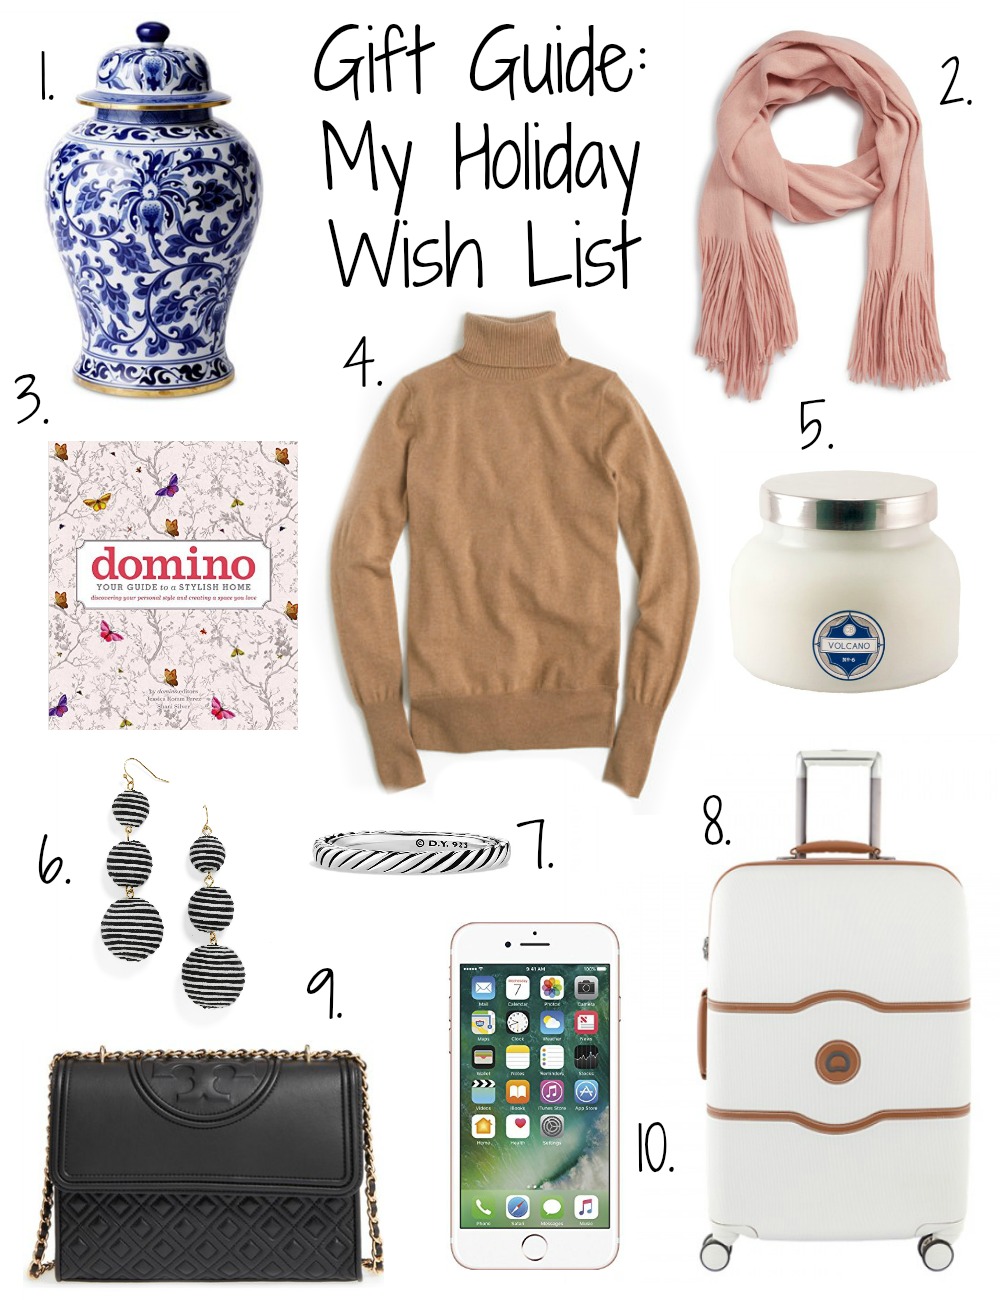 my-holiday-wish-list - Gift Guide: My Holiday Wish List by North Carolina style blogger Coffee Beans and Bobby Pins